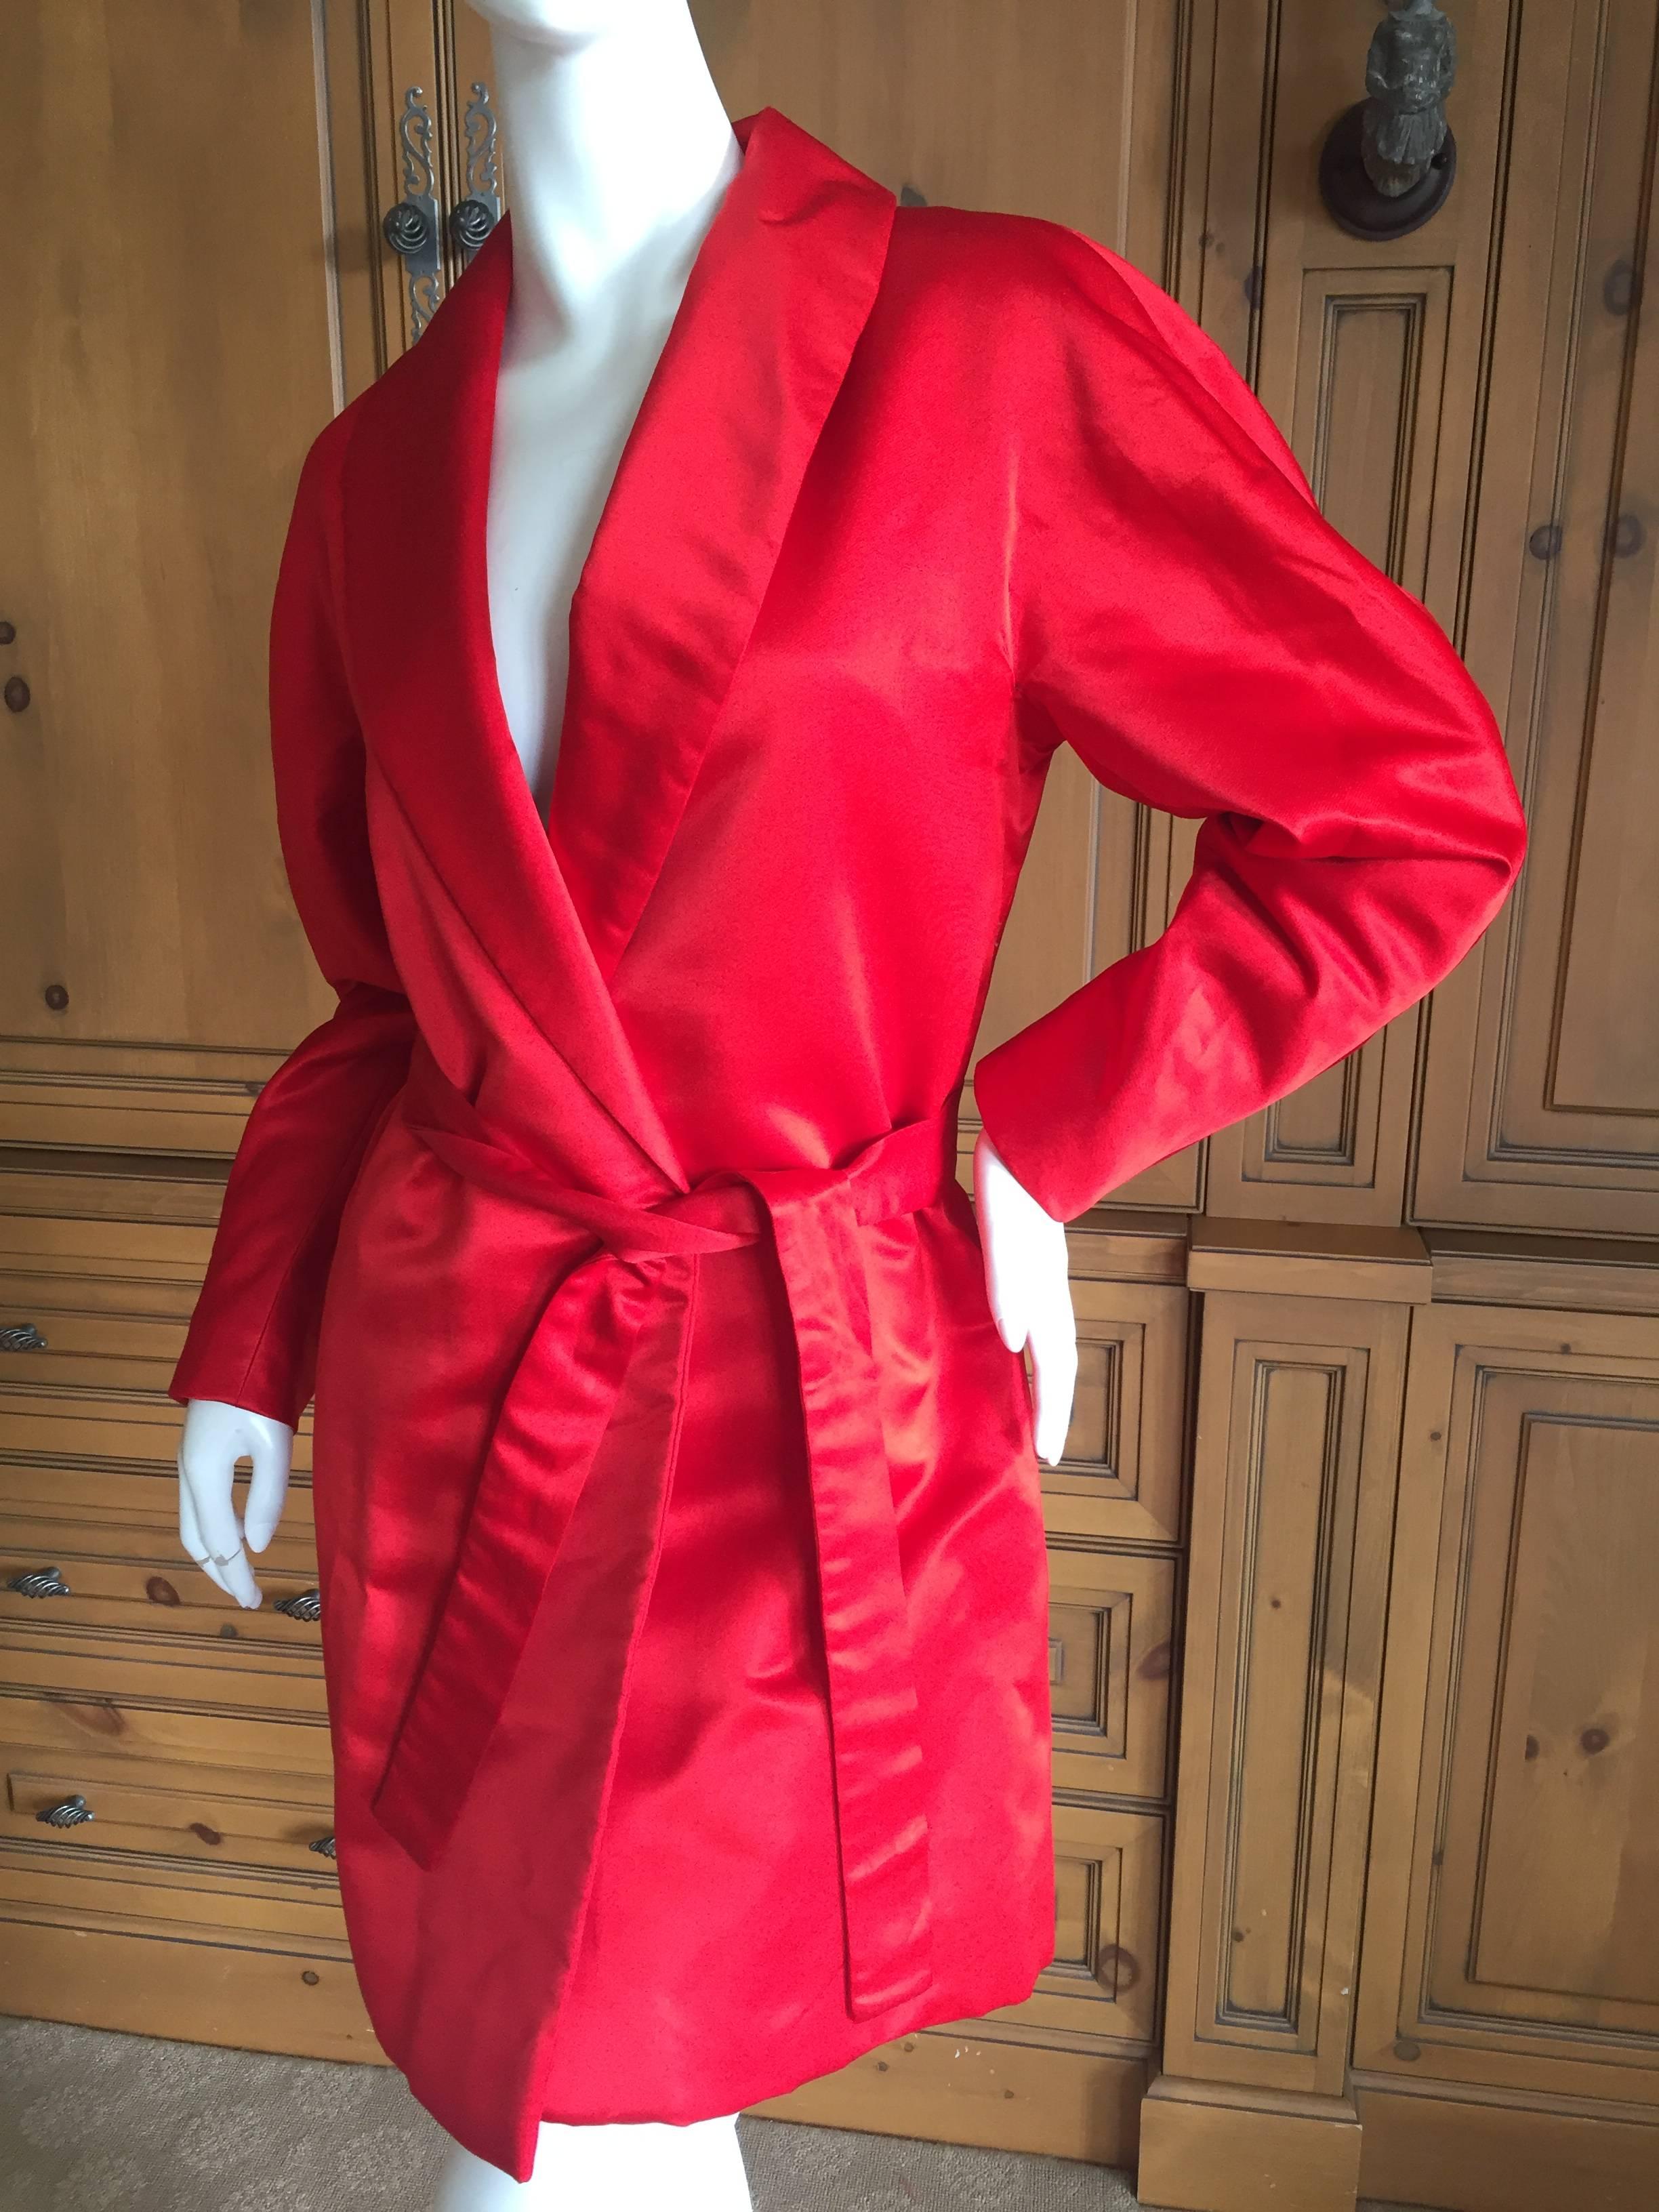 Halston Vintage Seventies Silk Faille Evening Coat In Excellent Condition For Sale In Cloverdale, CA